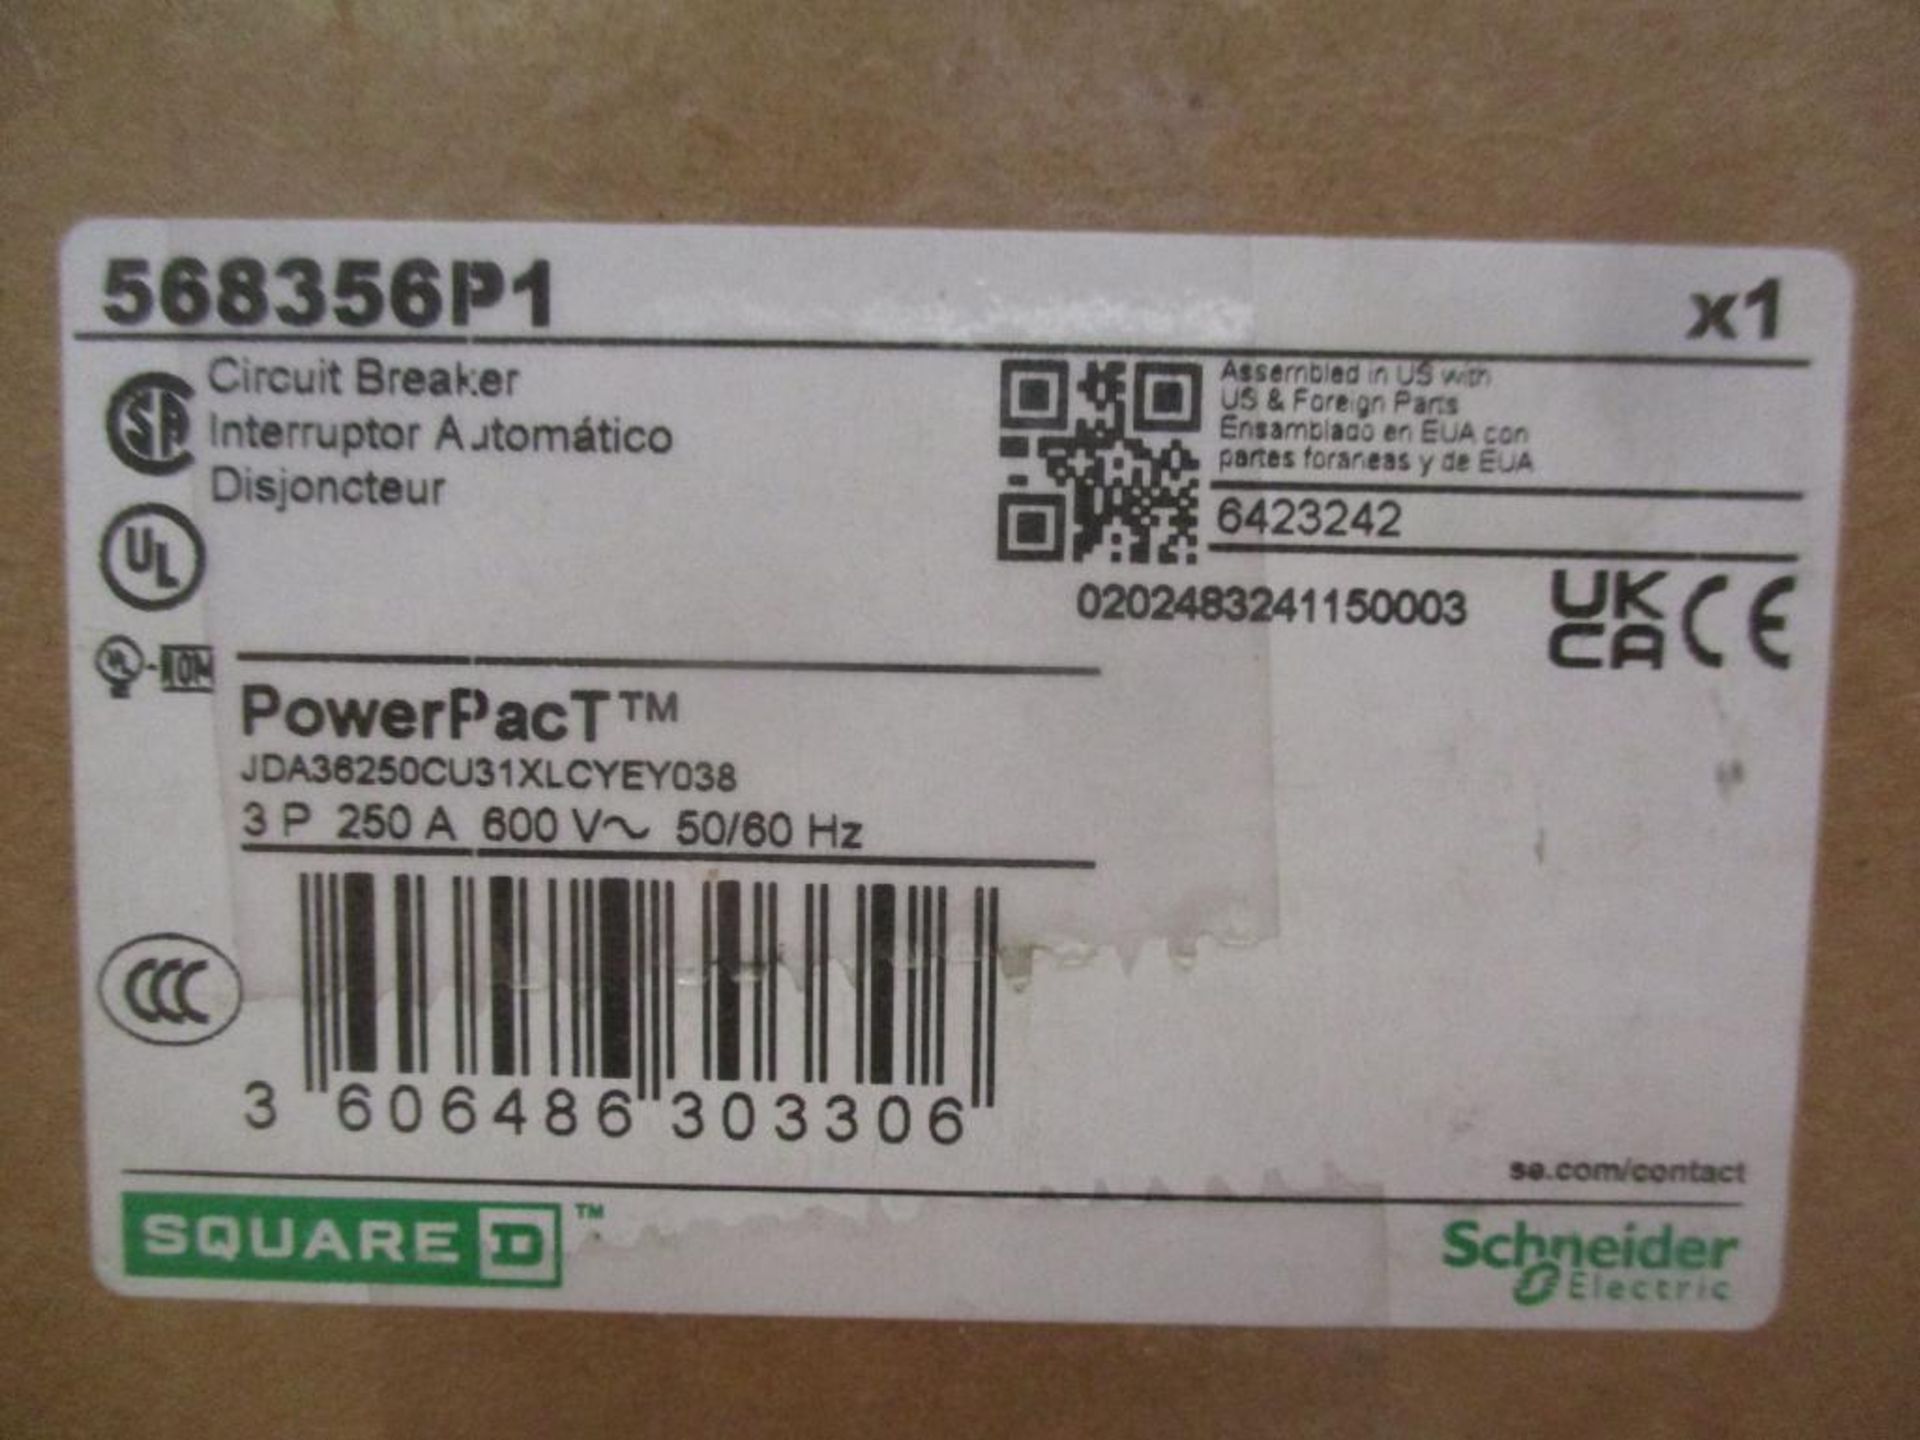 Square D 250 AMP Circuit Breaker, 568356P1, 3P, 250A, 600VAC, PowerPacT (New in Box) - Image 4 of 4